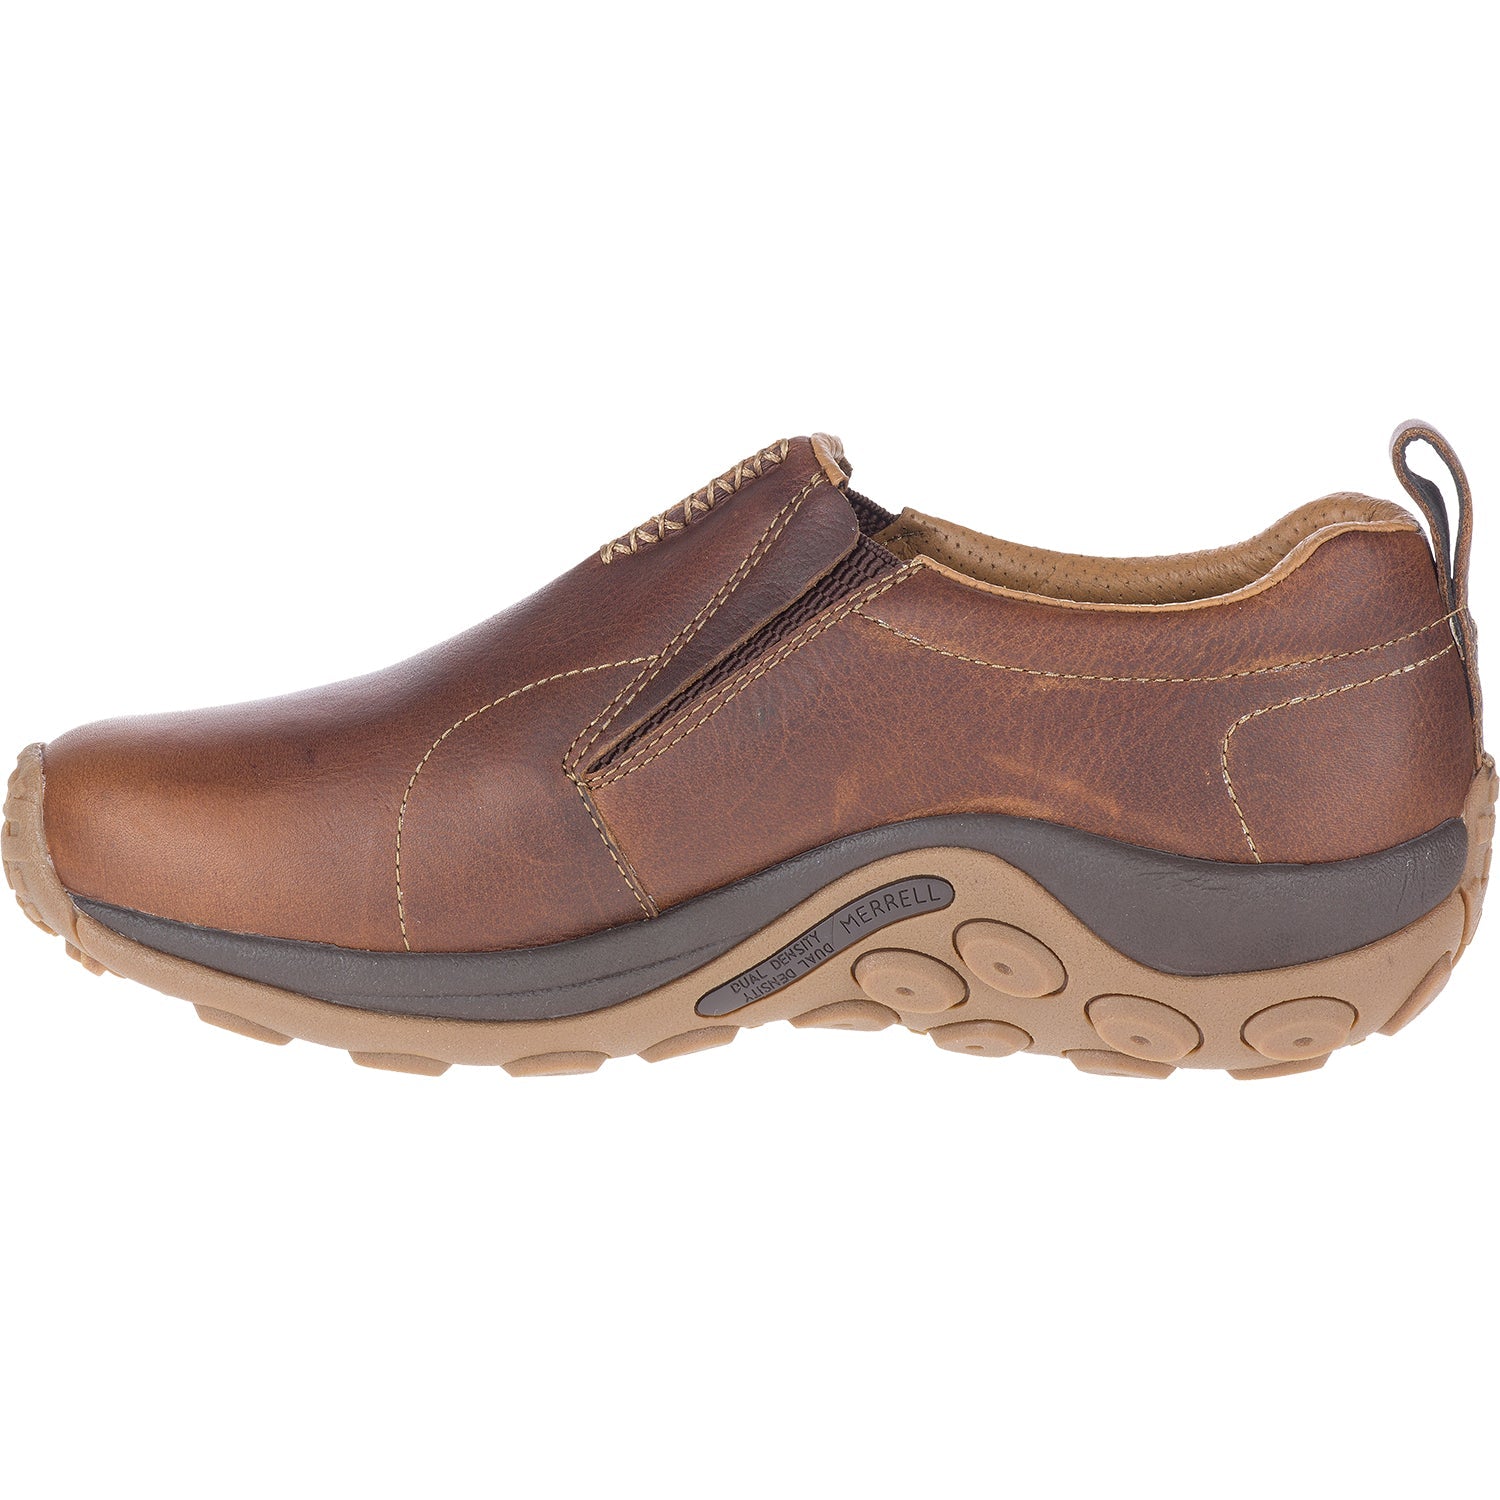 Merrell Jungle Moc Crafted | Men's Slip-On Shoes | Footwear etc.